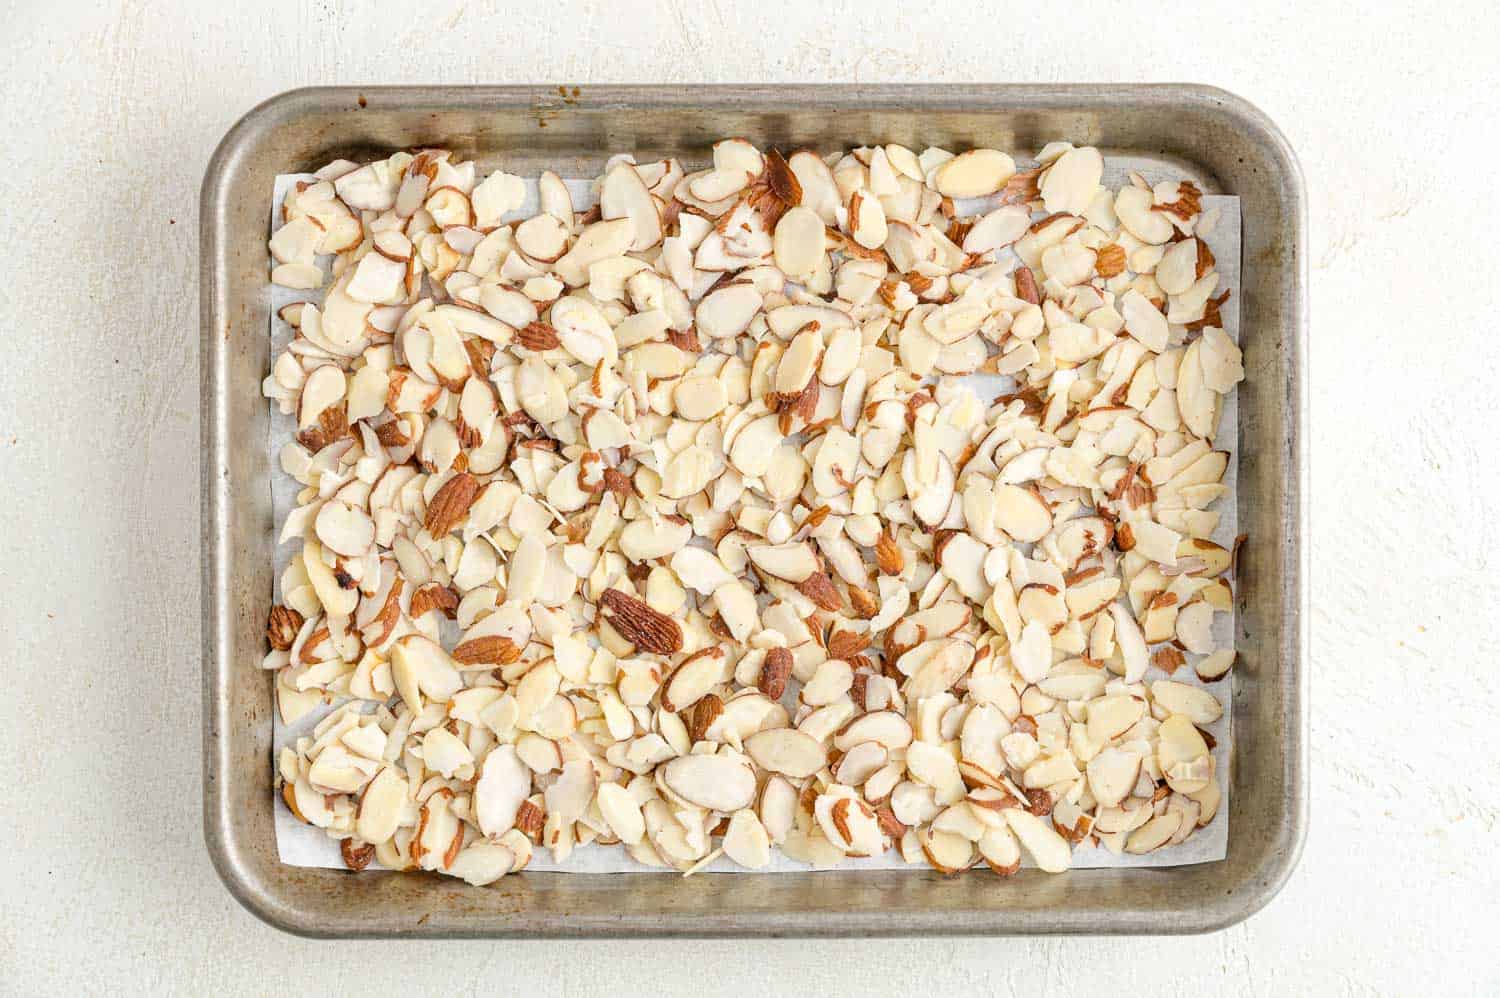 Sliced almonds spread into an even layer on a parchment-lined baking sheet.